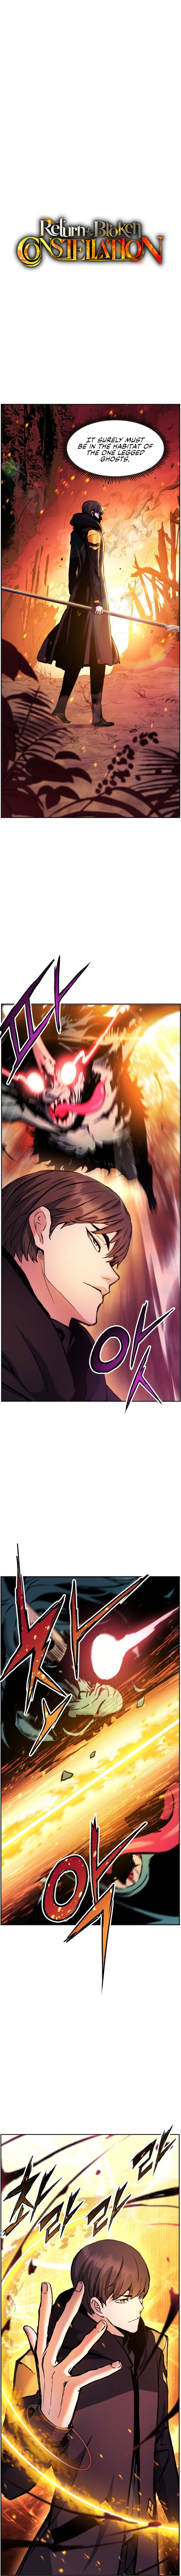 return-of-the-shattered-constellation-chap-34-3